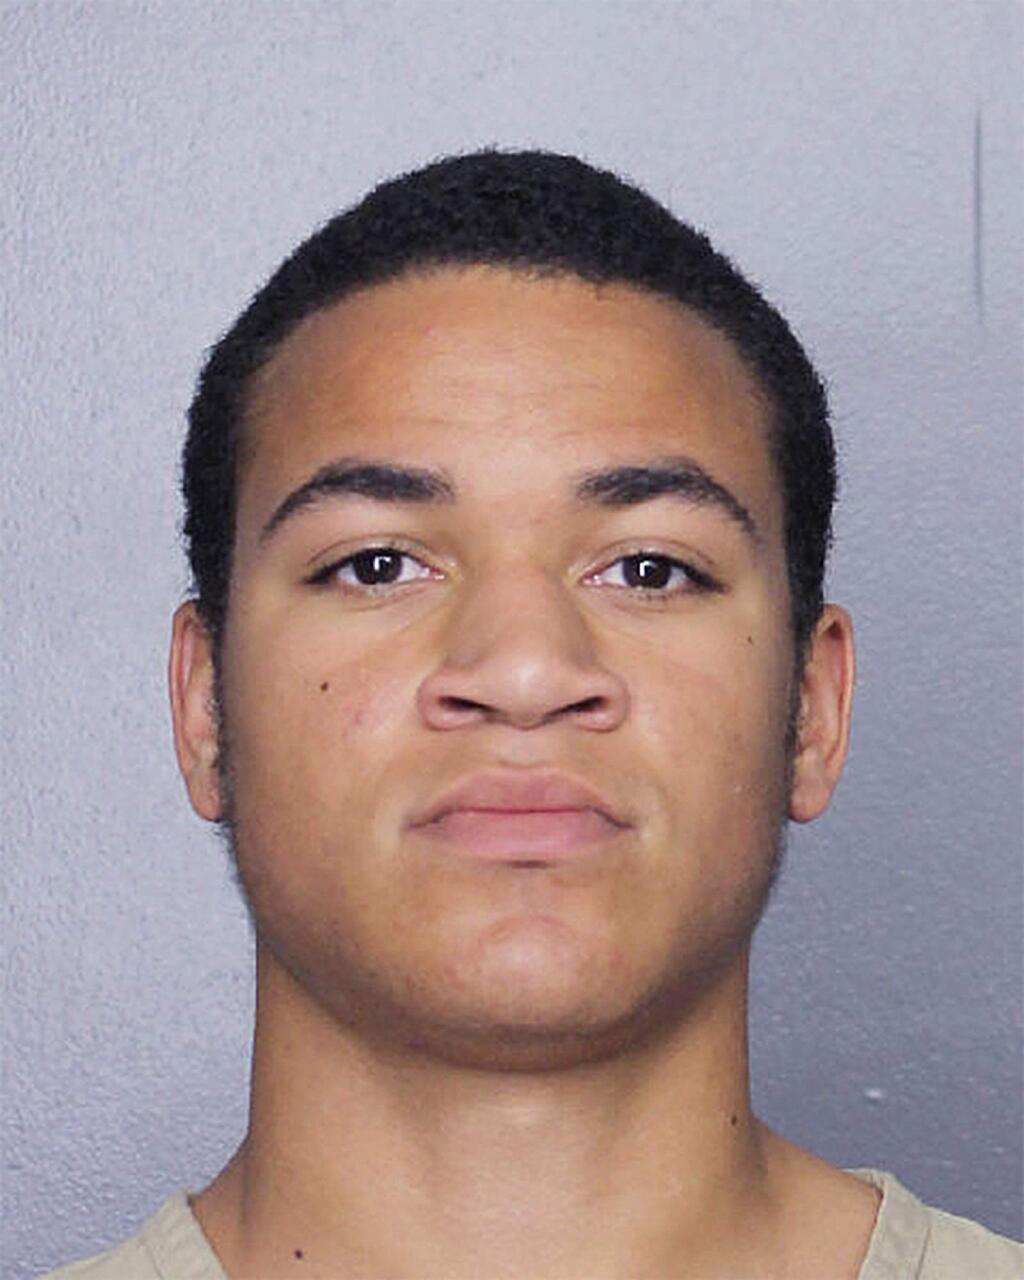 This undated photo released by the Broward Sheriff's Office shows Zachary Cruz. Cruz, the brother of Nikolas Cruz charged with killing 17 people at Marjory Stoneman Douglas High School, was arrested Monday, March 19, 2018 and charged for trespassing at the same school, authorities said. (Broward Sheriff's Office via AP)